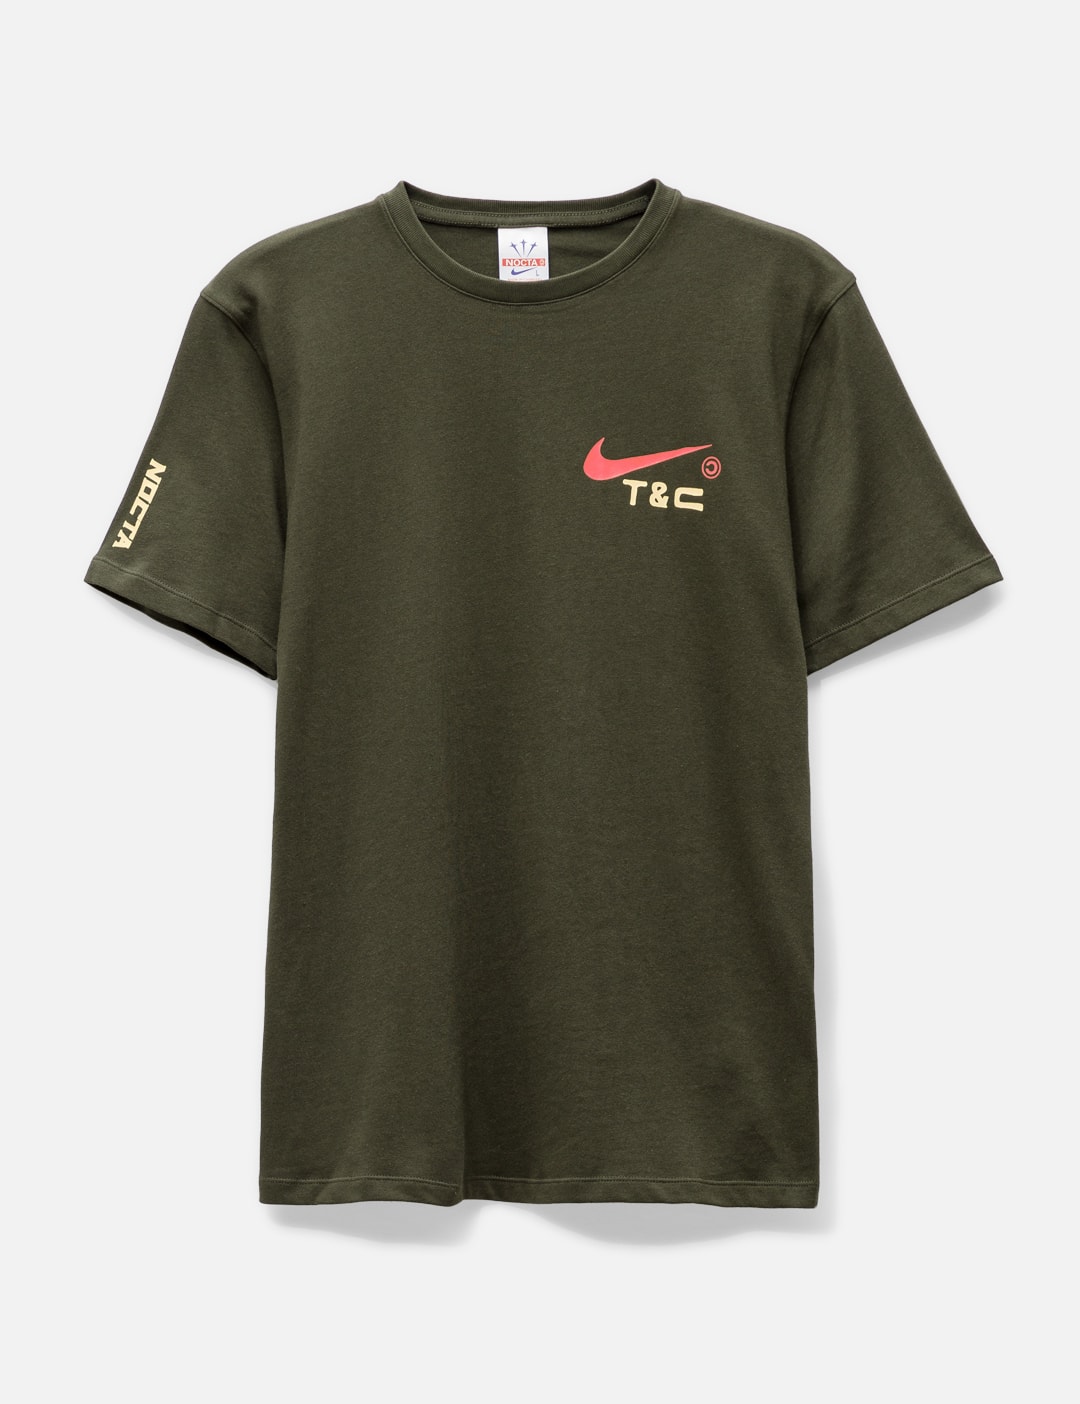 Nike - Nike X NOCTA CPFM T-Shirt | HBX - Globally Curated Fashion and ...